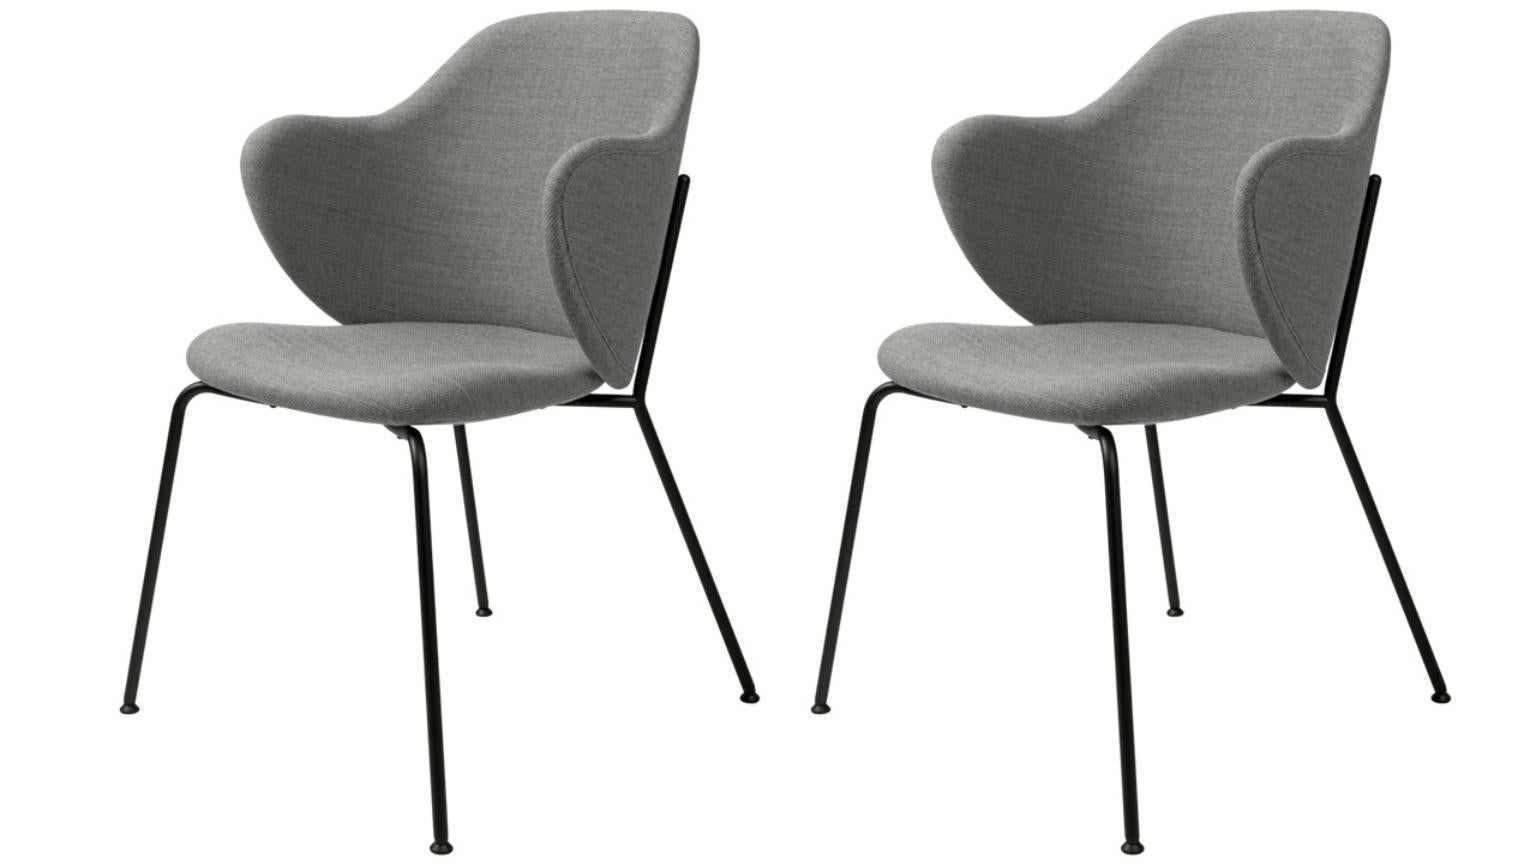 Set of 2 grey Fiord Lassen chairs by Lassen.
Dimensions : W 58 x D 60 x H 88 cm.
Materials : Textile.

The Lassen chair by Flemming Lassen, Magnus Sangild and Marianne Viktor was launched in 2018 as an ode to Flemming Lassen’s uncompromising